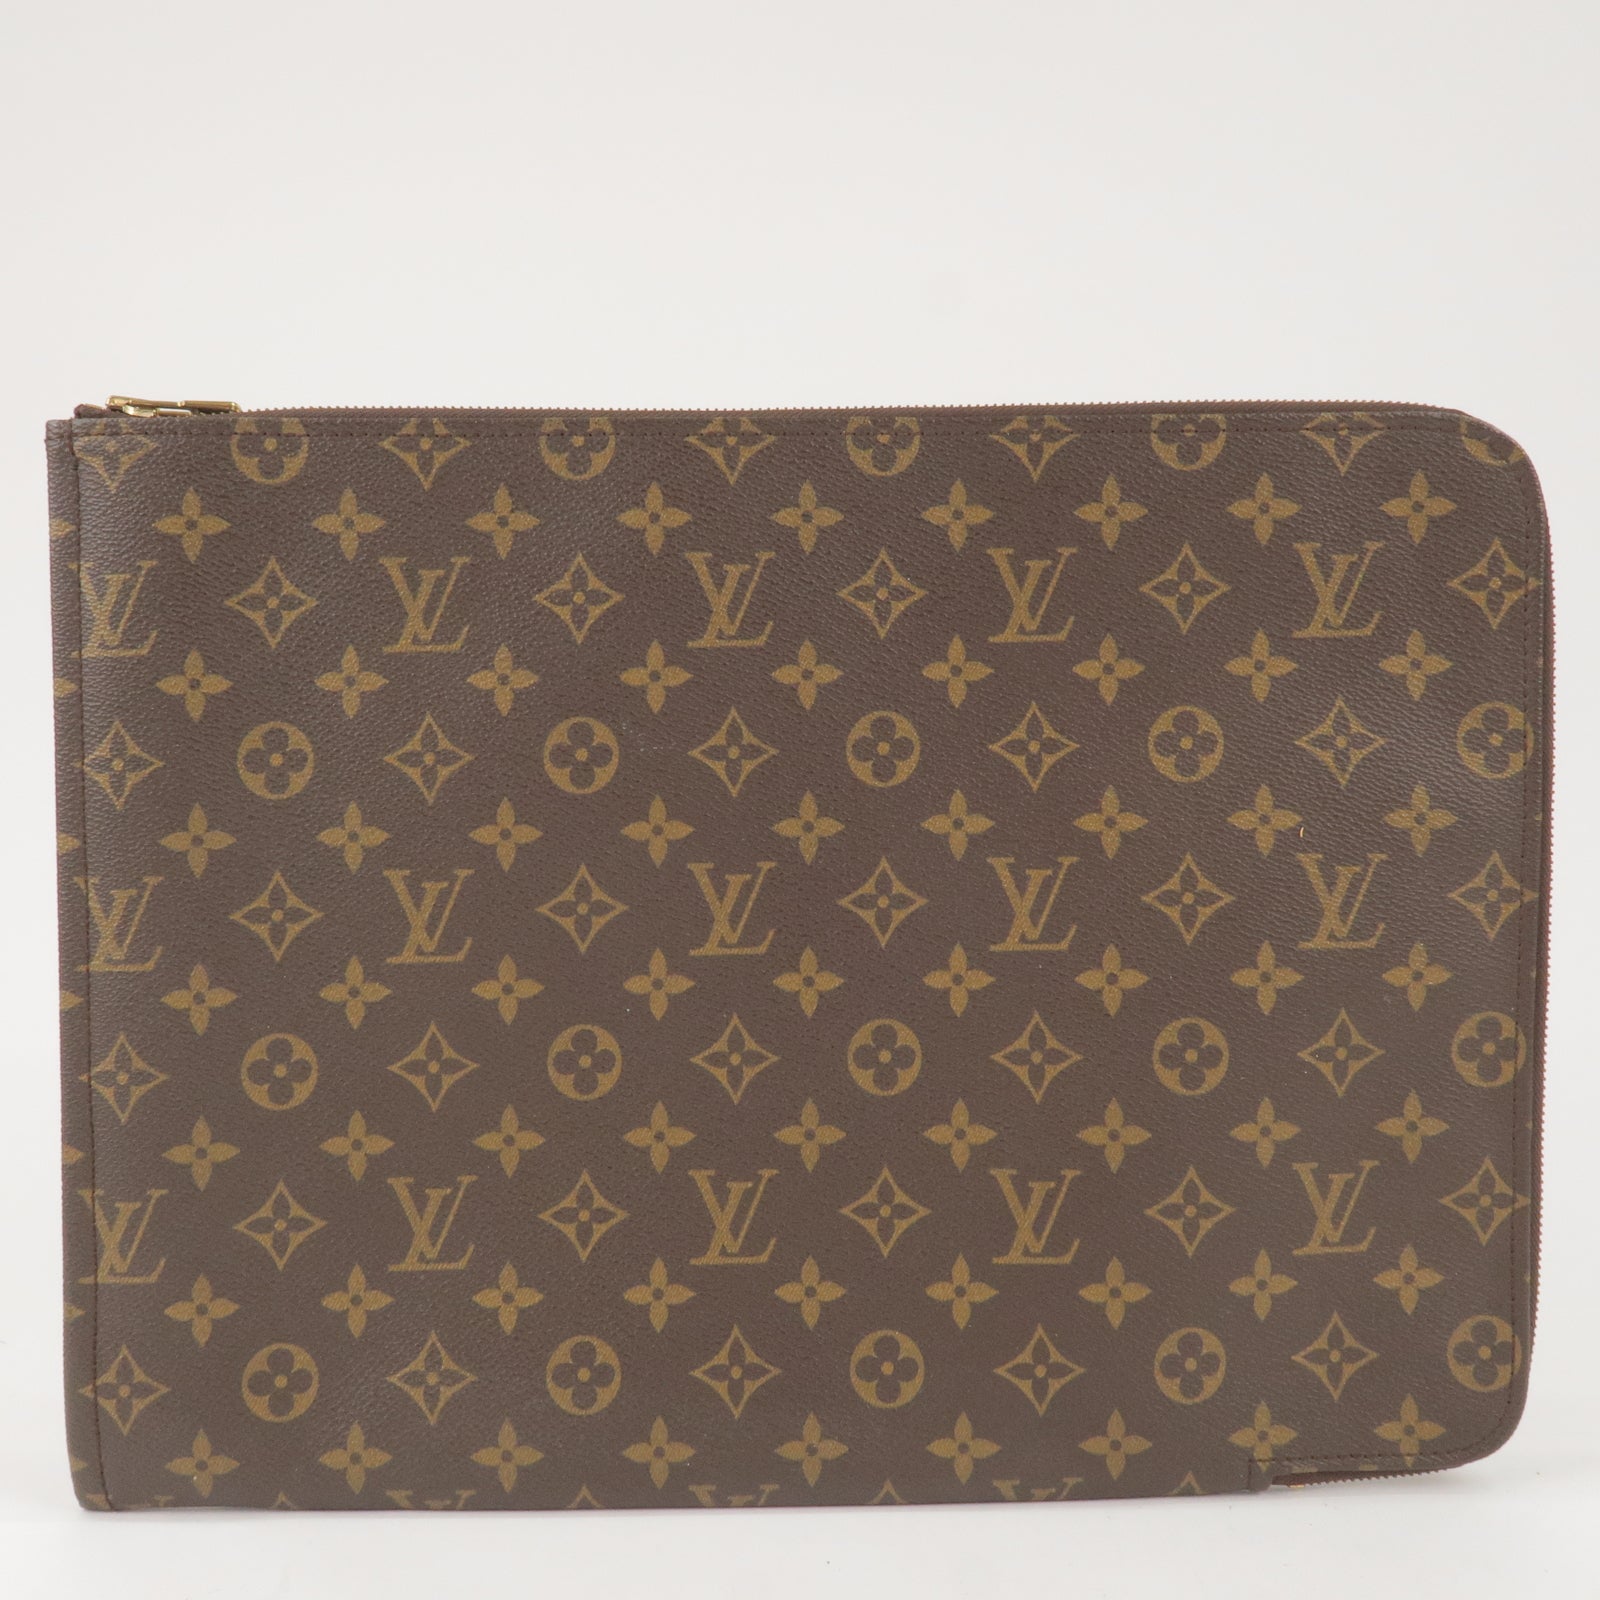 9 Louis Vuitton Neverfull Dupes That Are Even More Beautiful